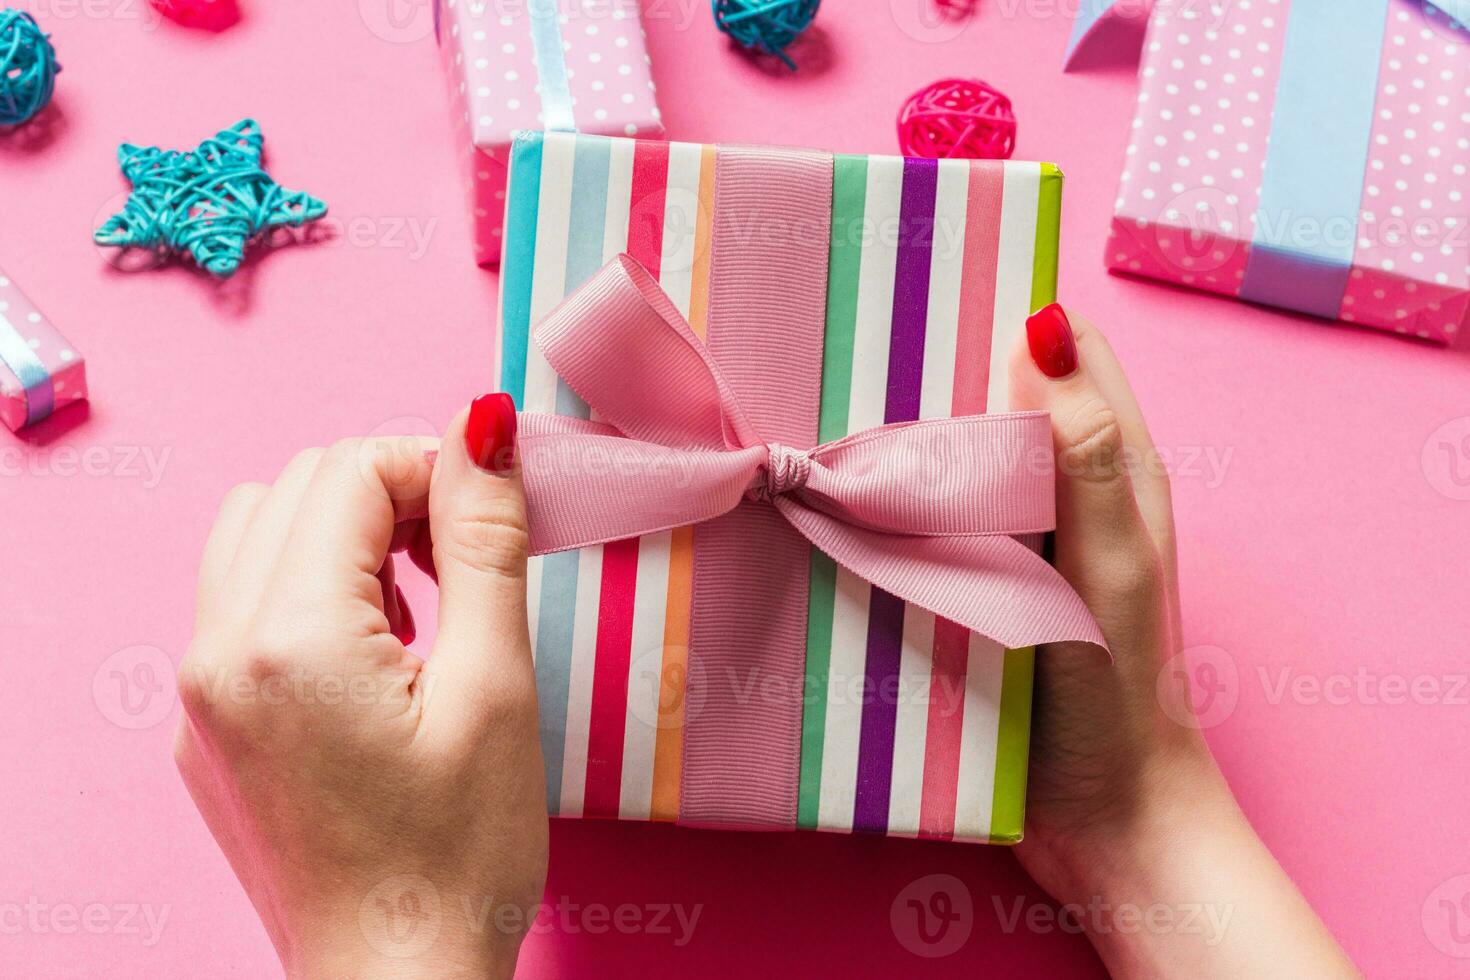 Top view of female hands holding a Christmas present on festive pink background. Holiday decorations, toys and balls. New Year holiday concept photo